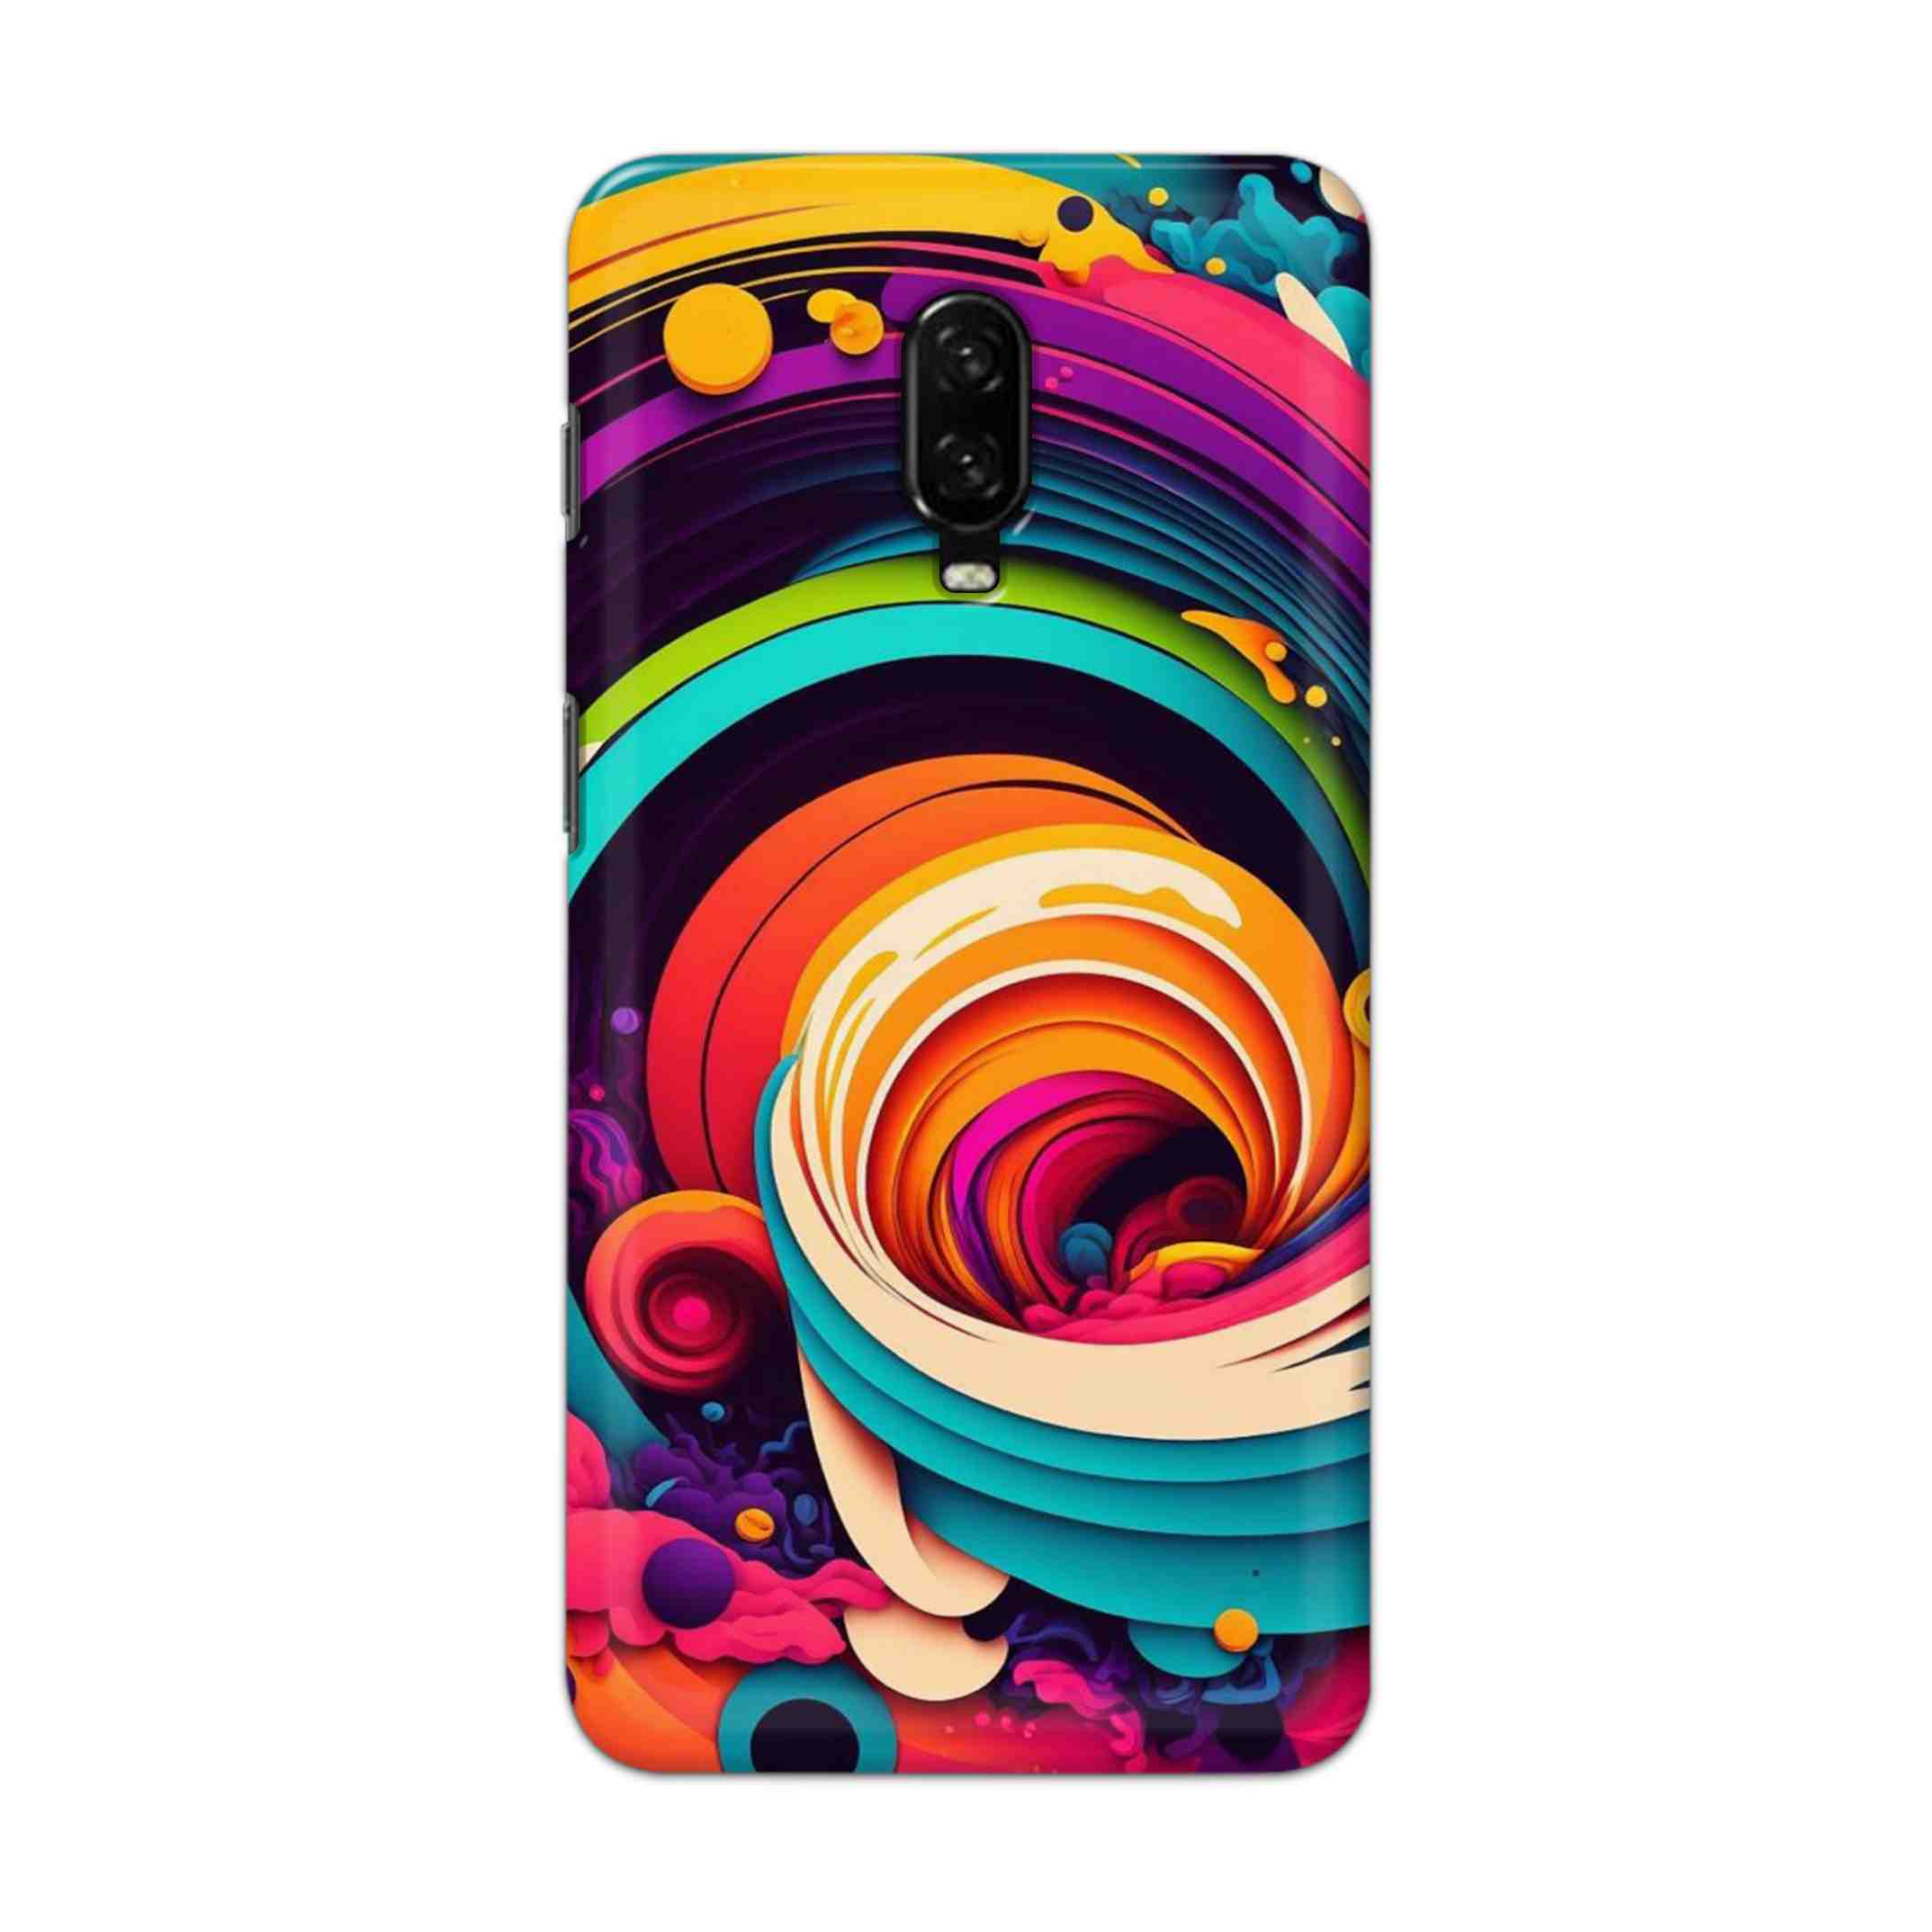 Buy Colour Circle Hard Back Mobile Phone Case Cover For OnePlus 6T Online